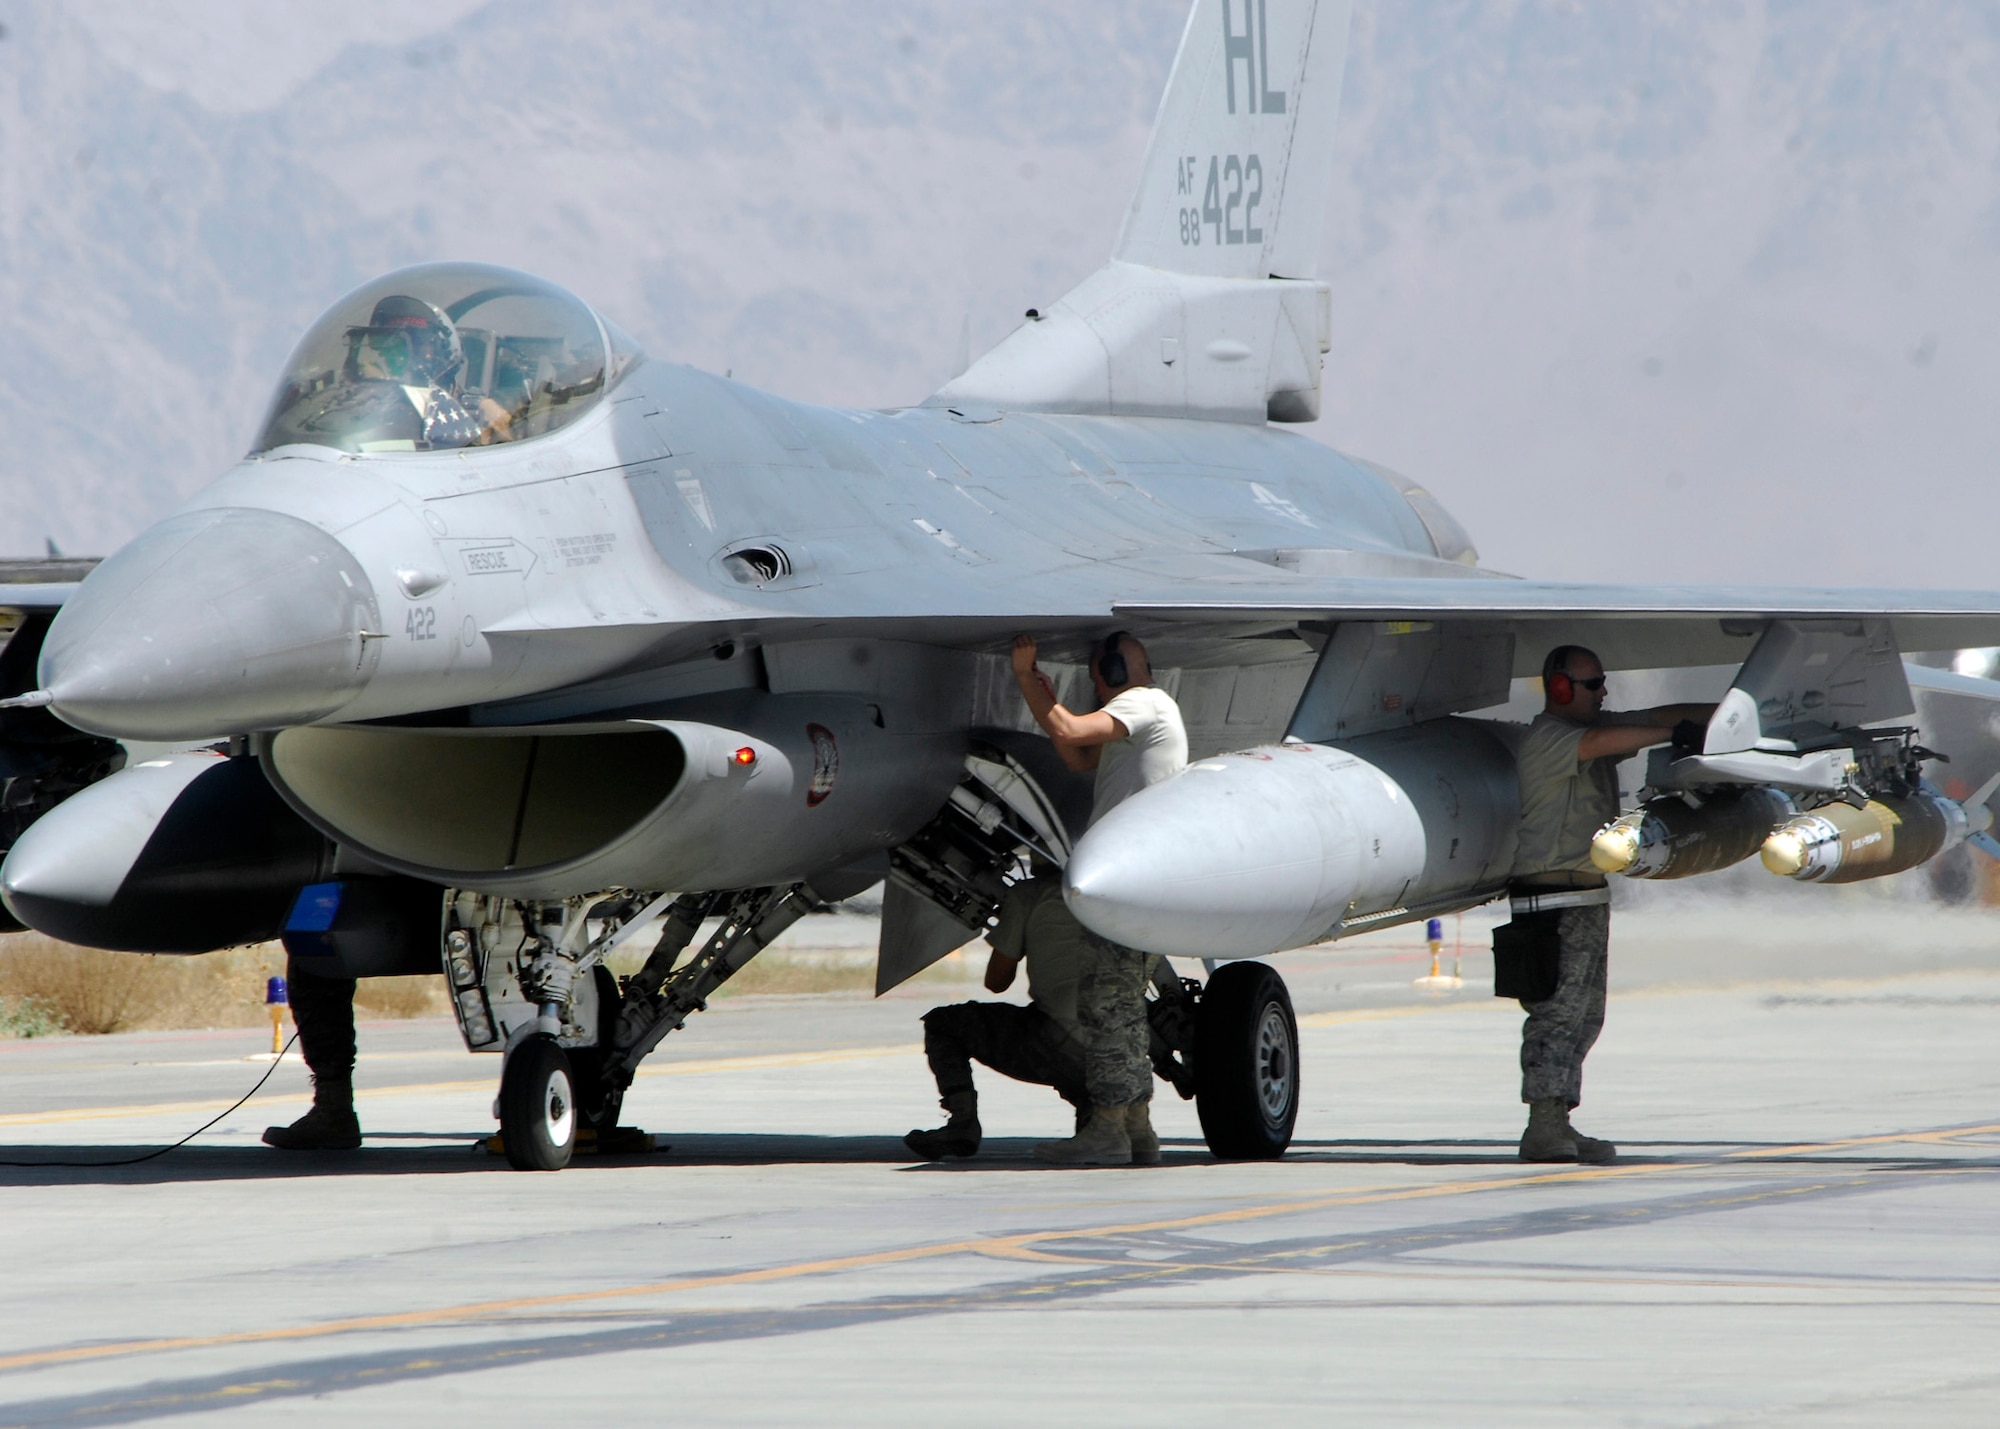 Airmen perform a final safety inspection before an F-16 Fighting Falcon takes off from Bagram Airfield, Afghanistan for a mission Aug. 20. The F-16s and the Airmen are deployed from Hill Air Force Base, Utah, and are assigned to the 421st Expeditionary Fighter Squadron. (U.S. Air Force photo/Felicia Juenke)